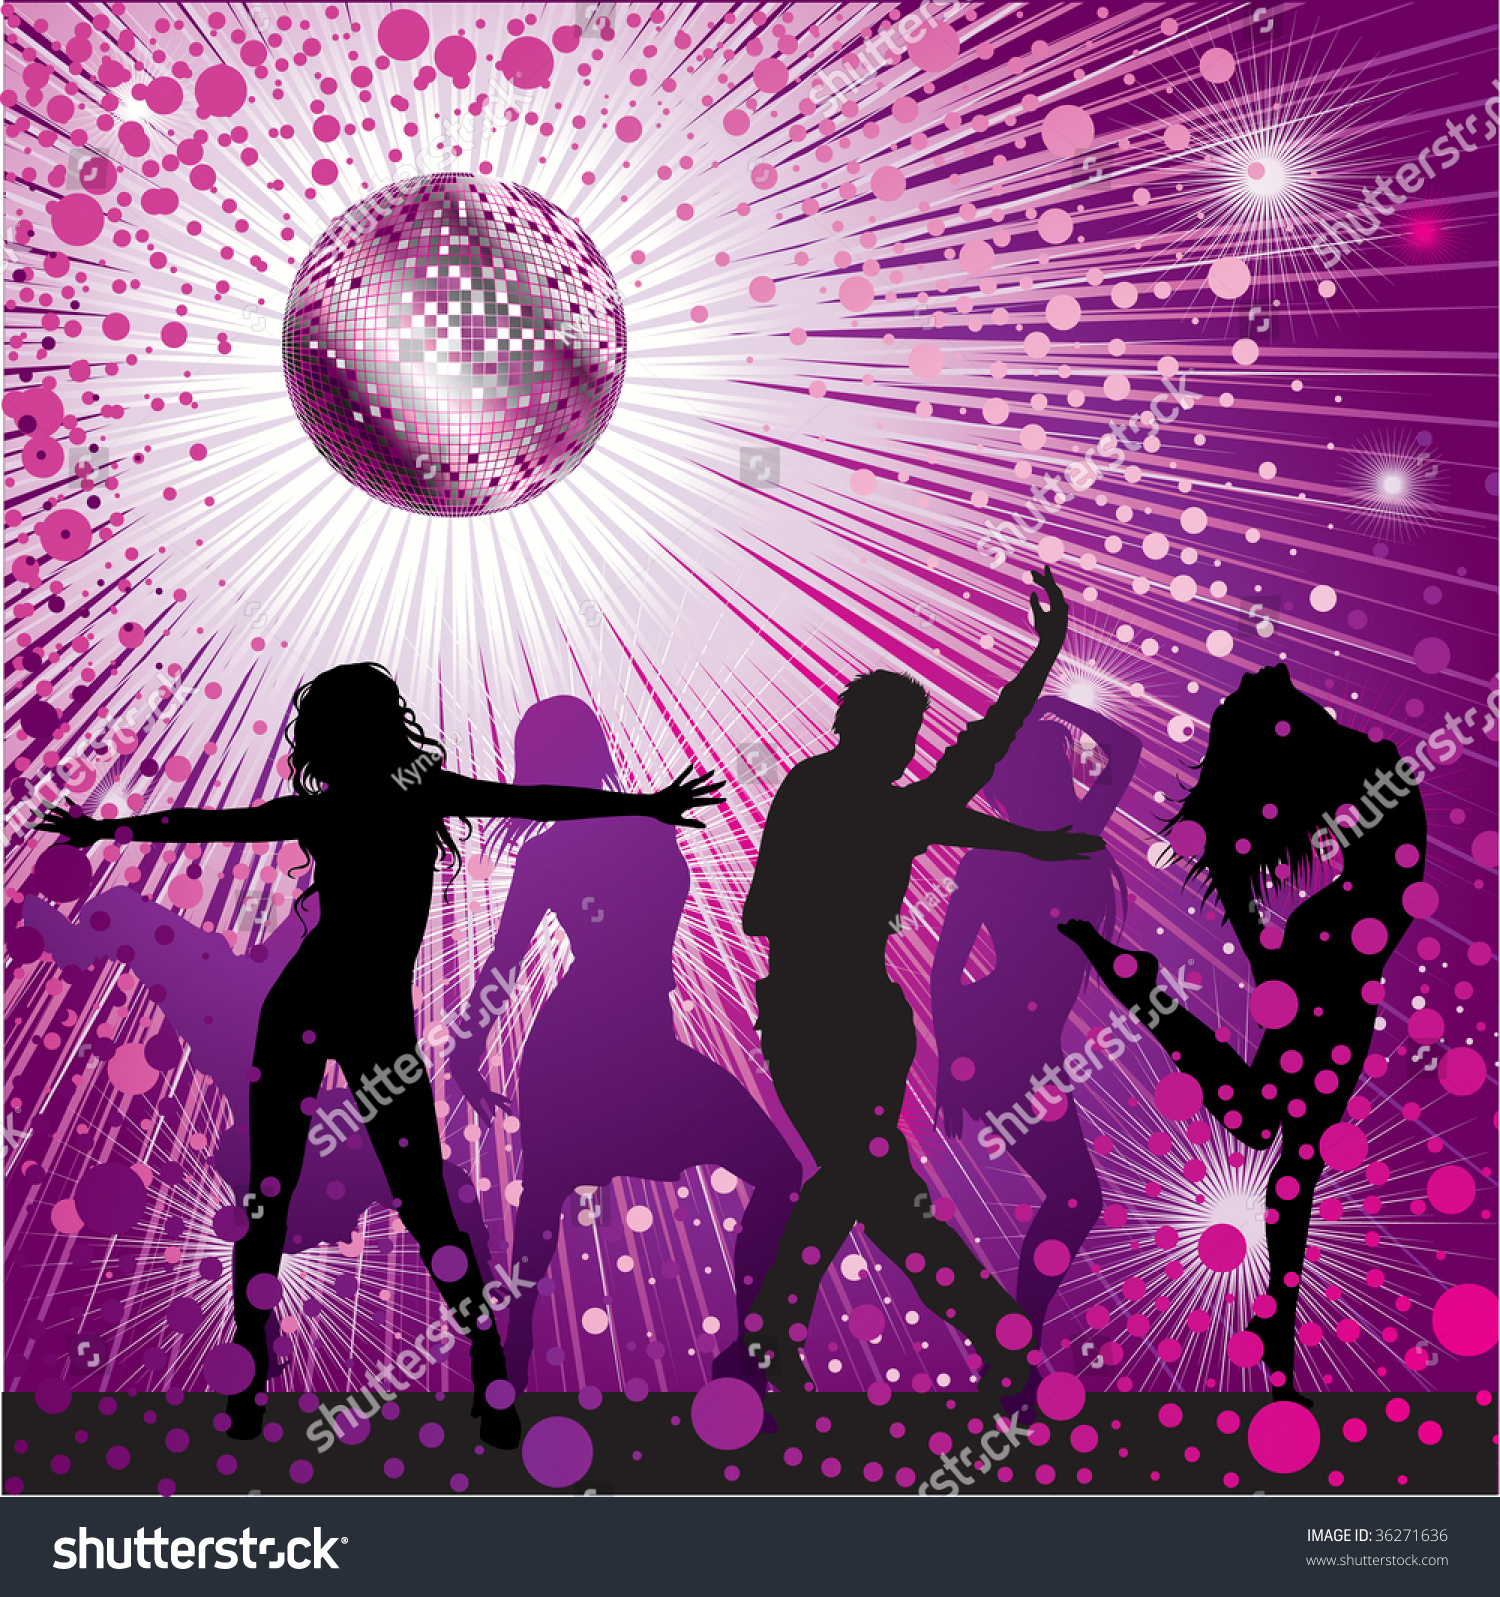 Vector Background With People Dancing In Night-Club, Disco-Ball And ...